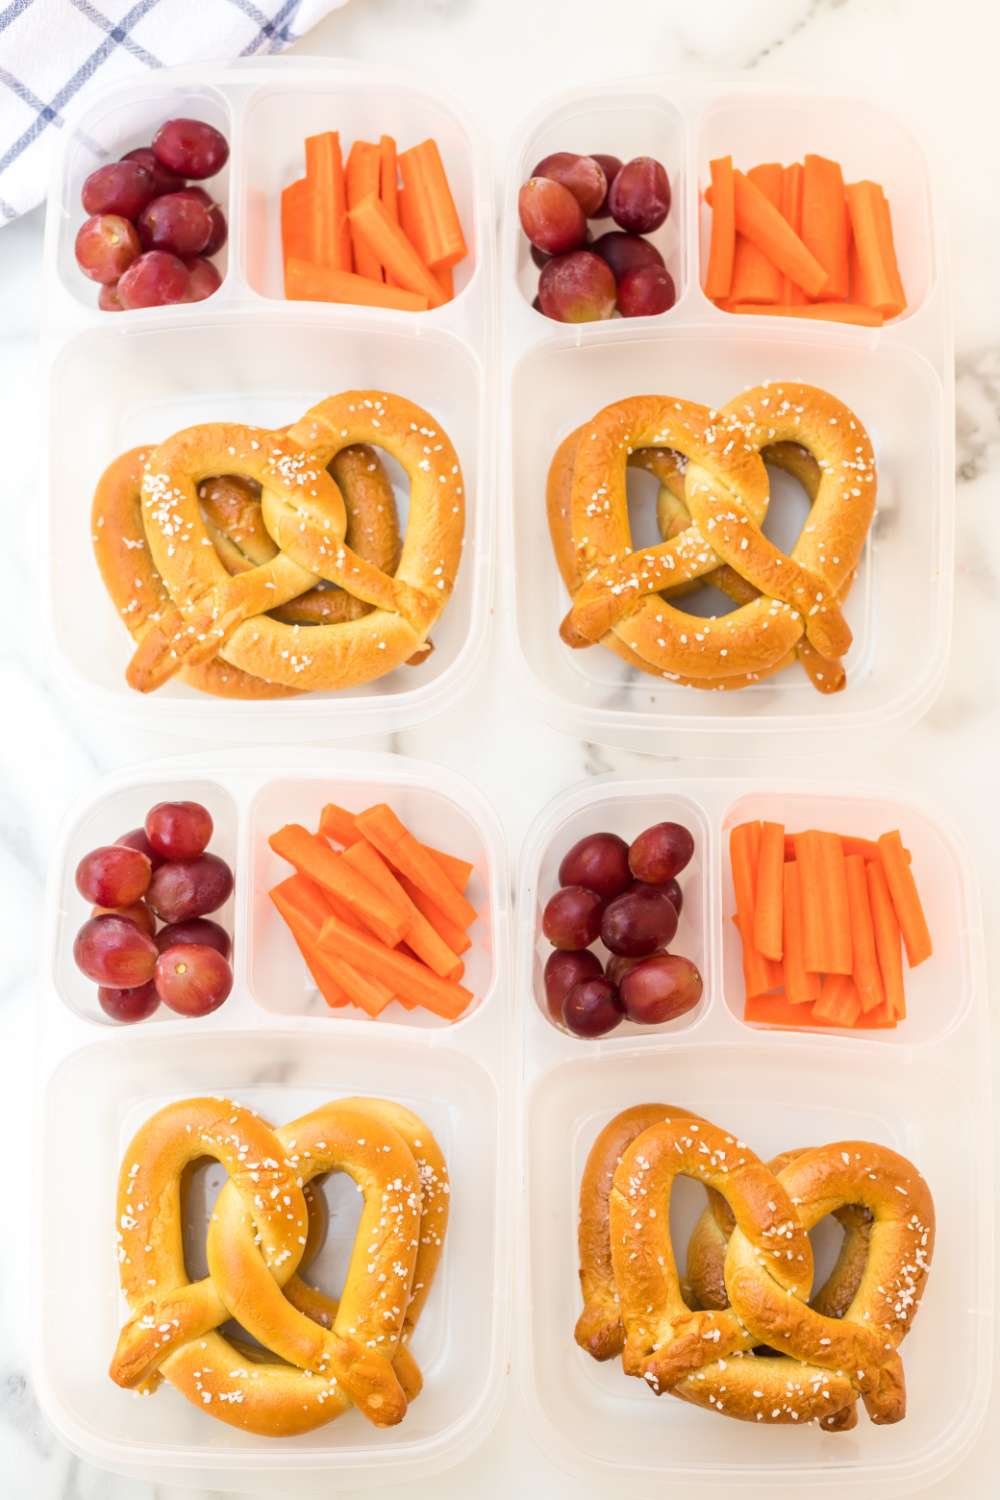 This easy soft pretzel lunch box idea is a great light school lunch idea, after school snack box kids and adults alike will love. via @familyfresh